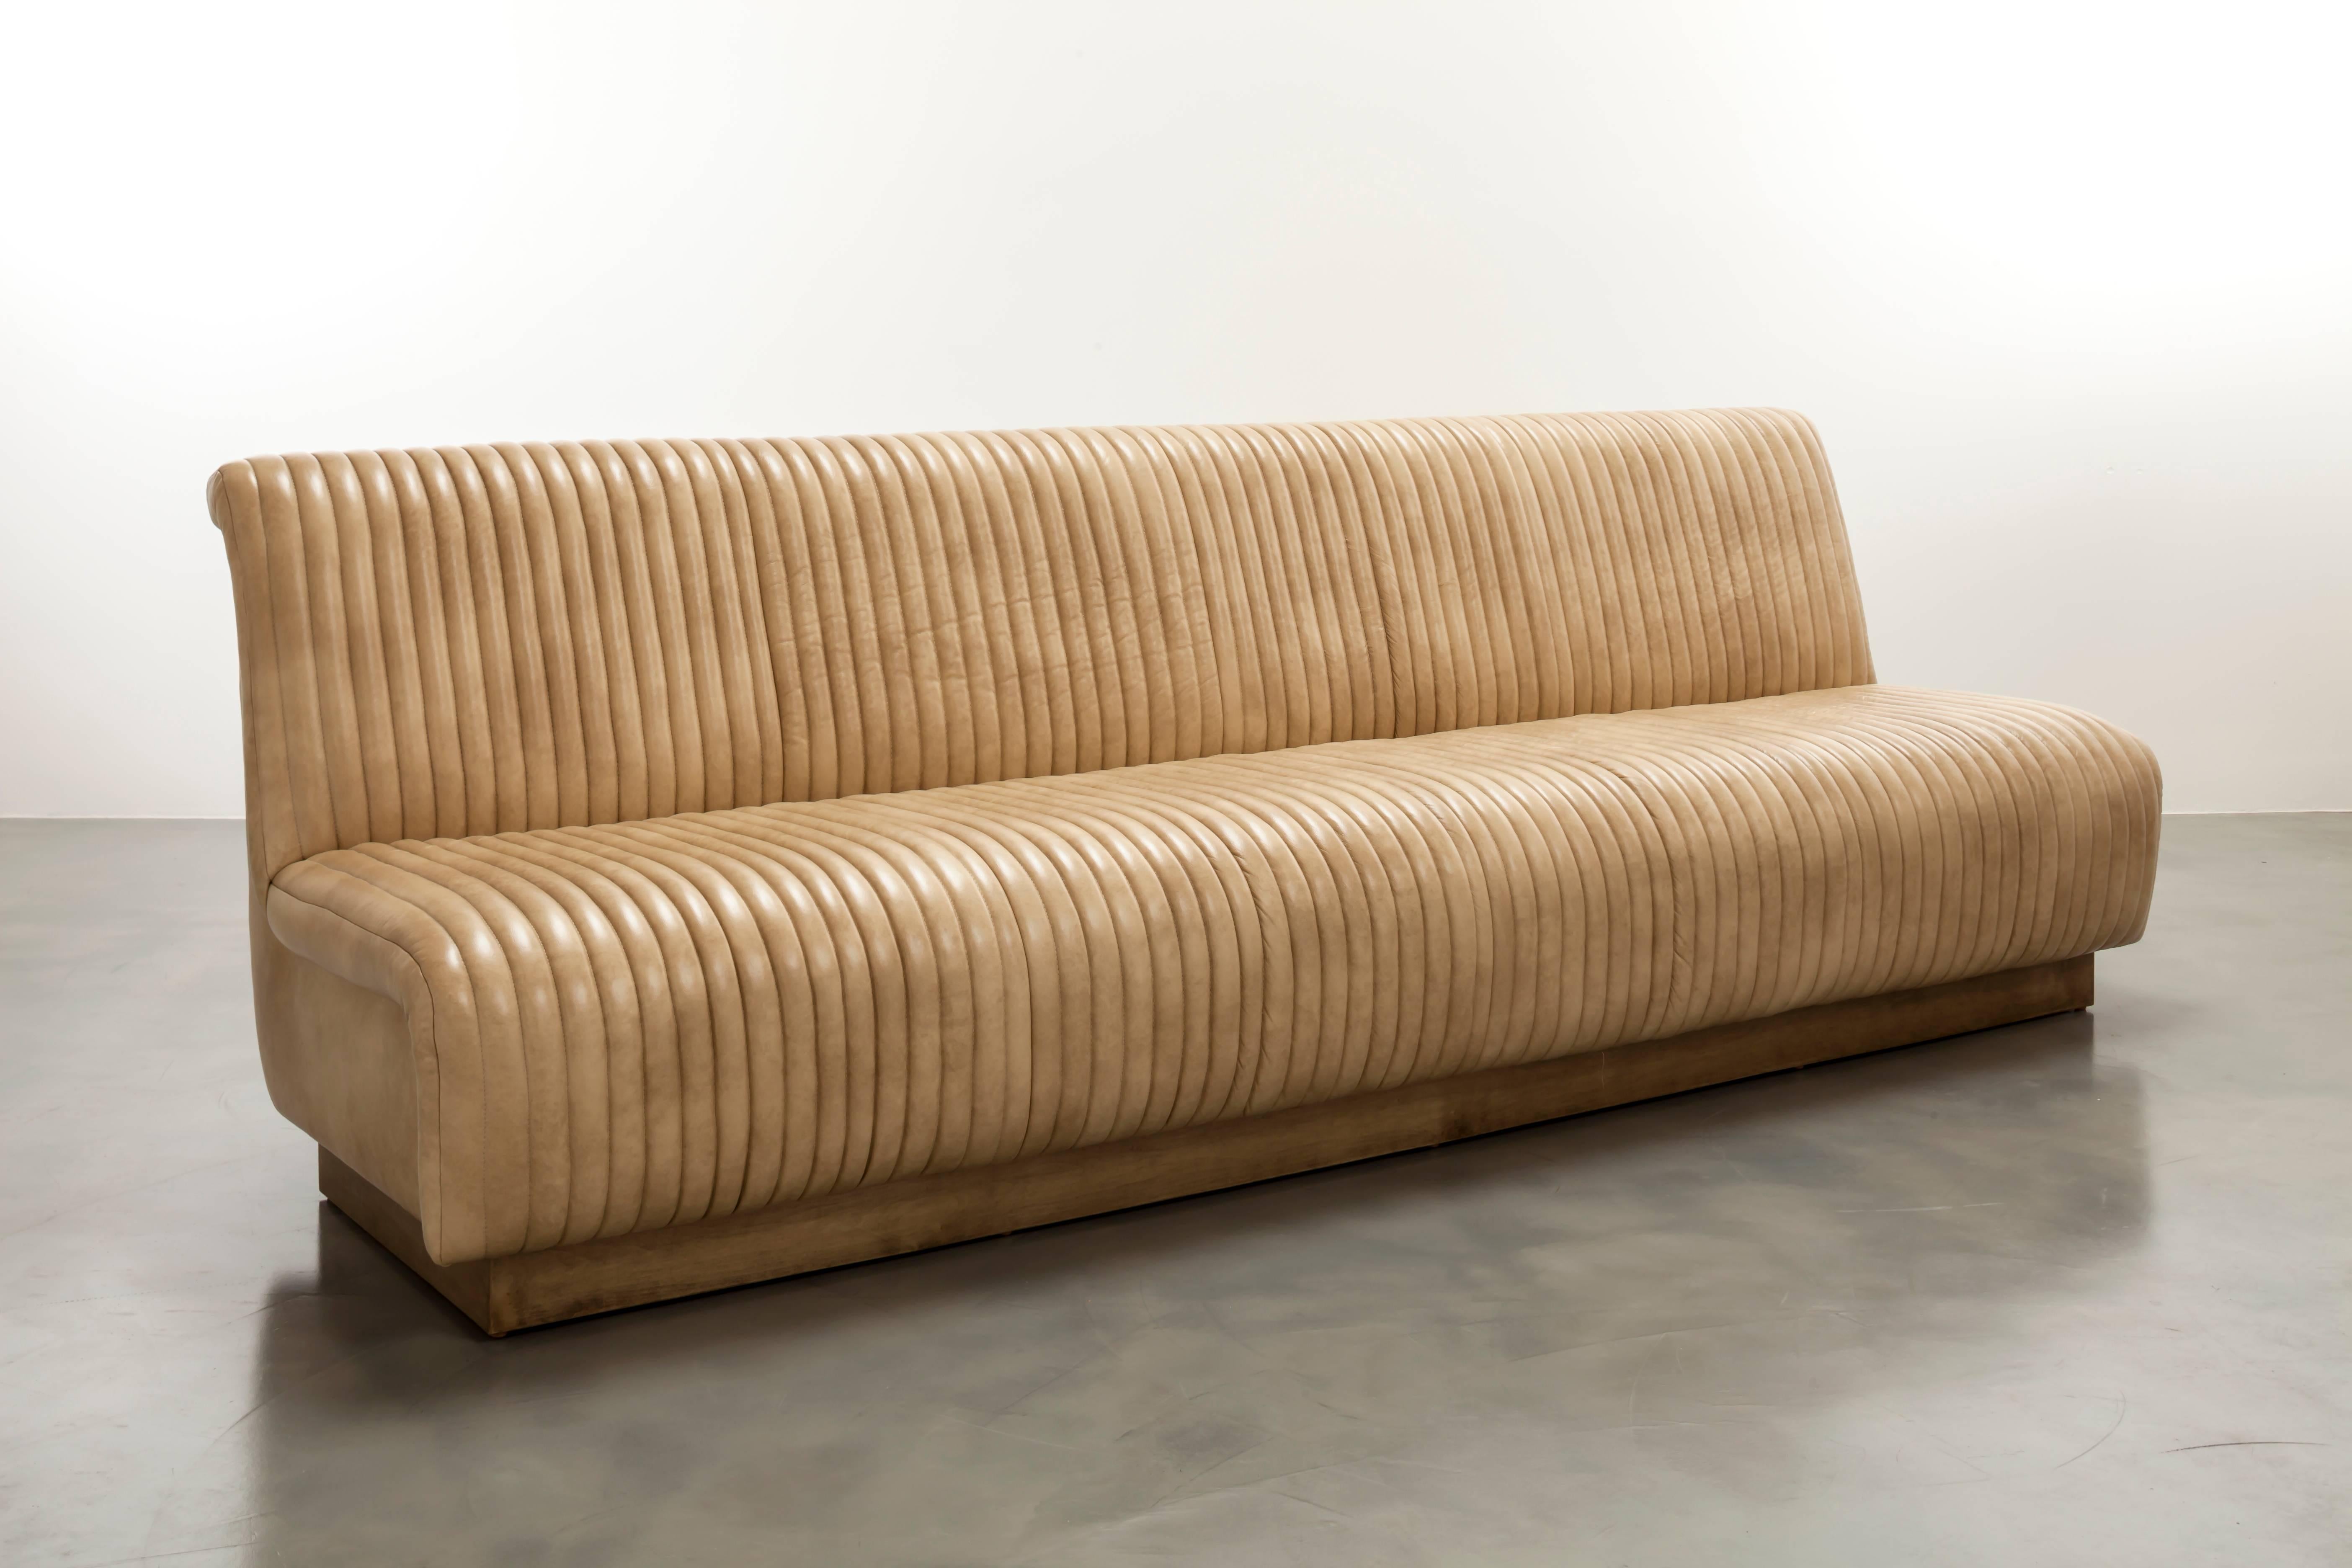 The Channel Sofa inspired by vintage car interiors features channeled waterfall leather on a wood plinth base.   Fully custom and made to order in California. As shown in Leather $15,170.  Starting at $9,950.